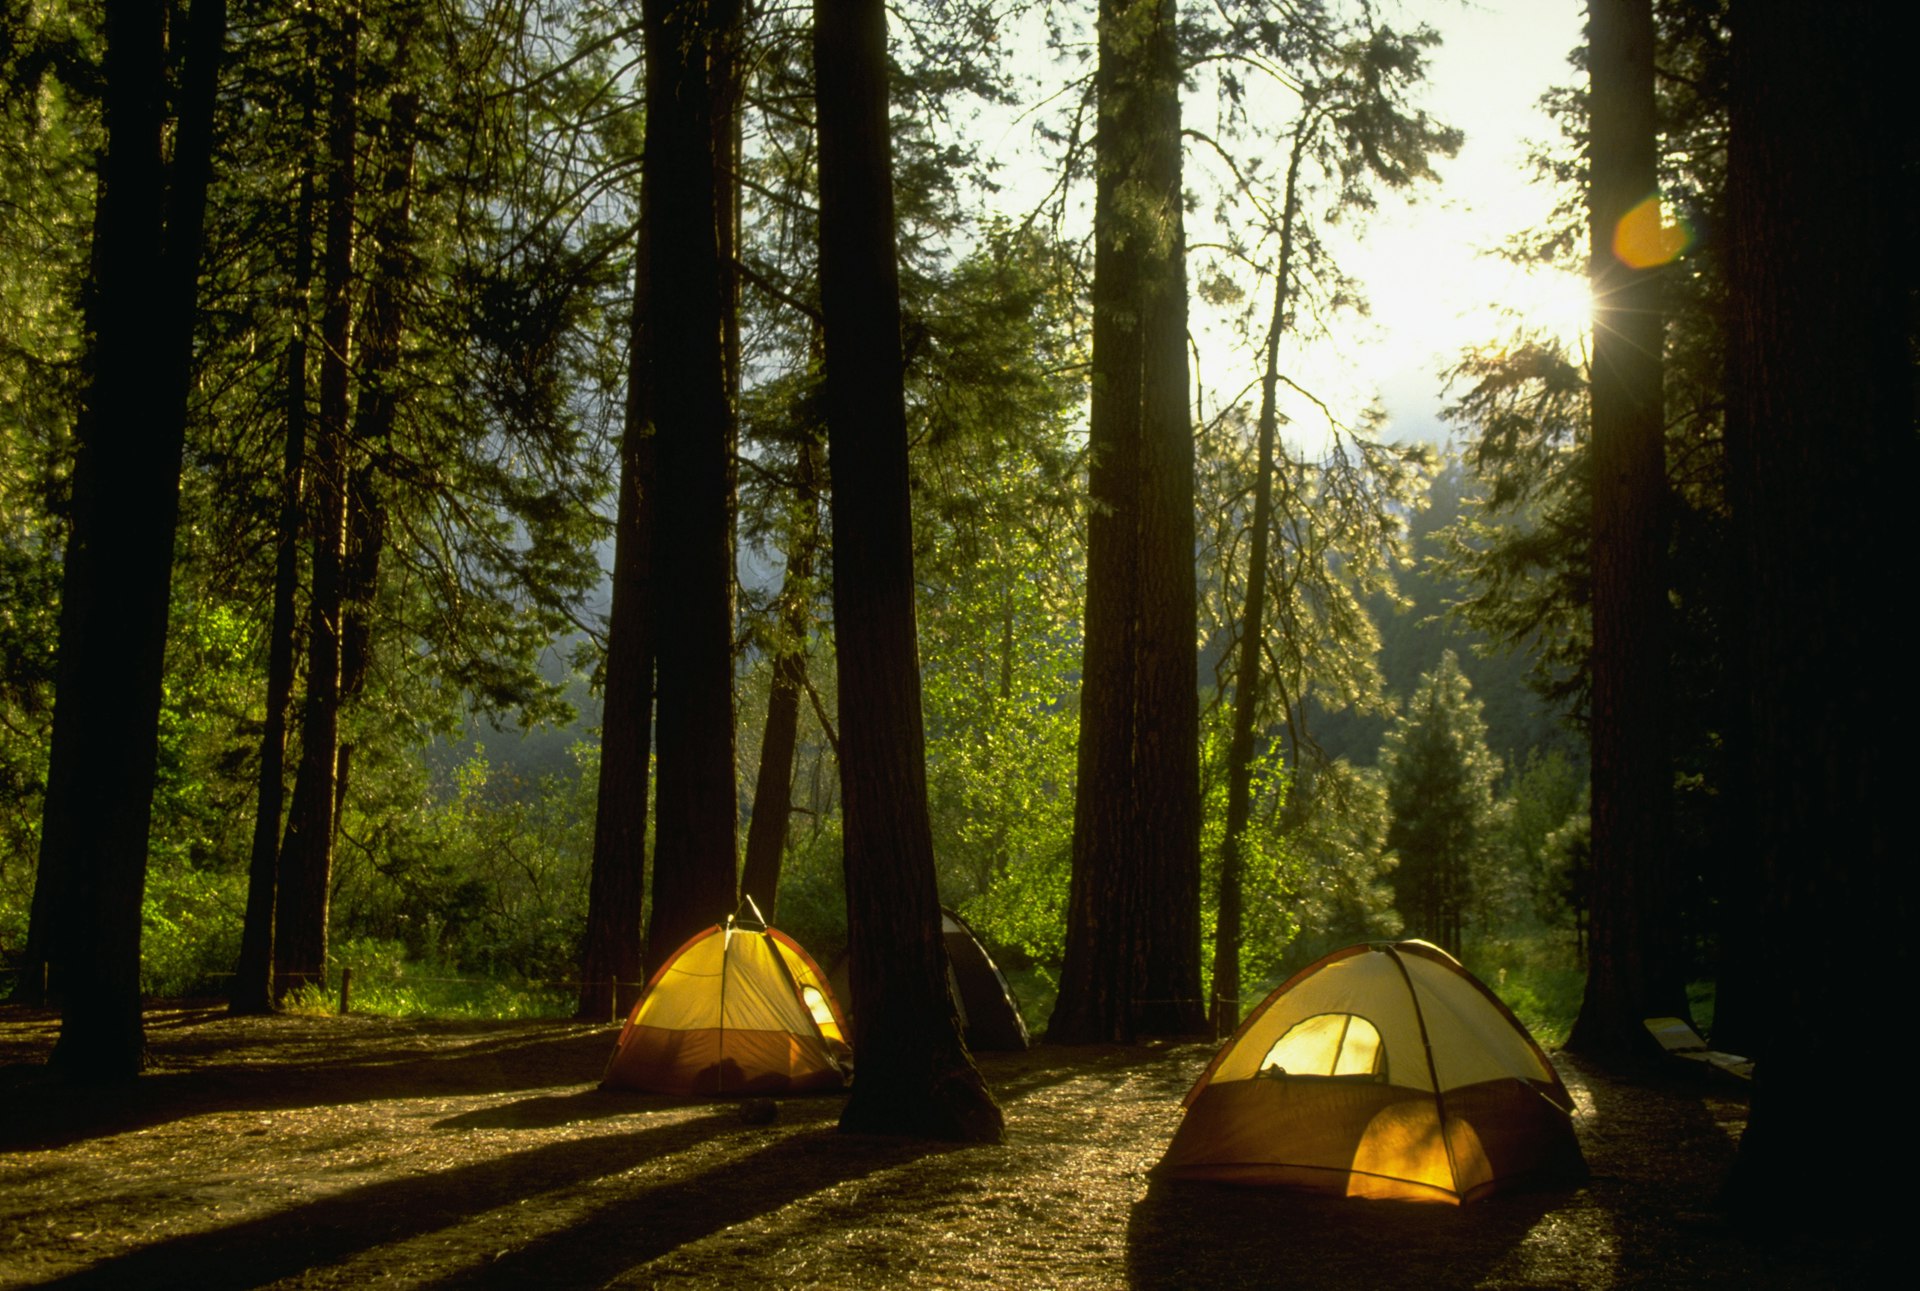 A tent with a light on inside, surrounded by the Yosemite woods